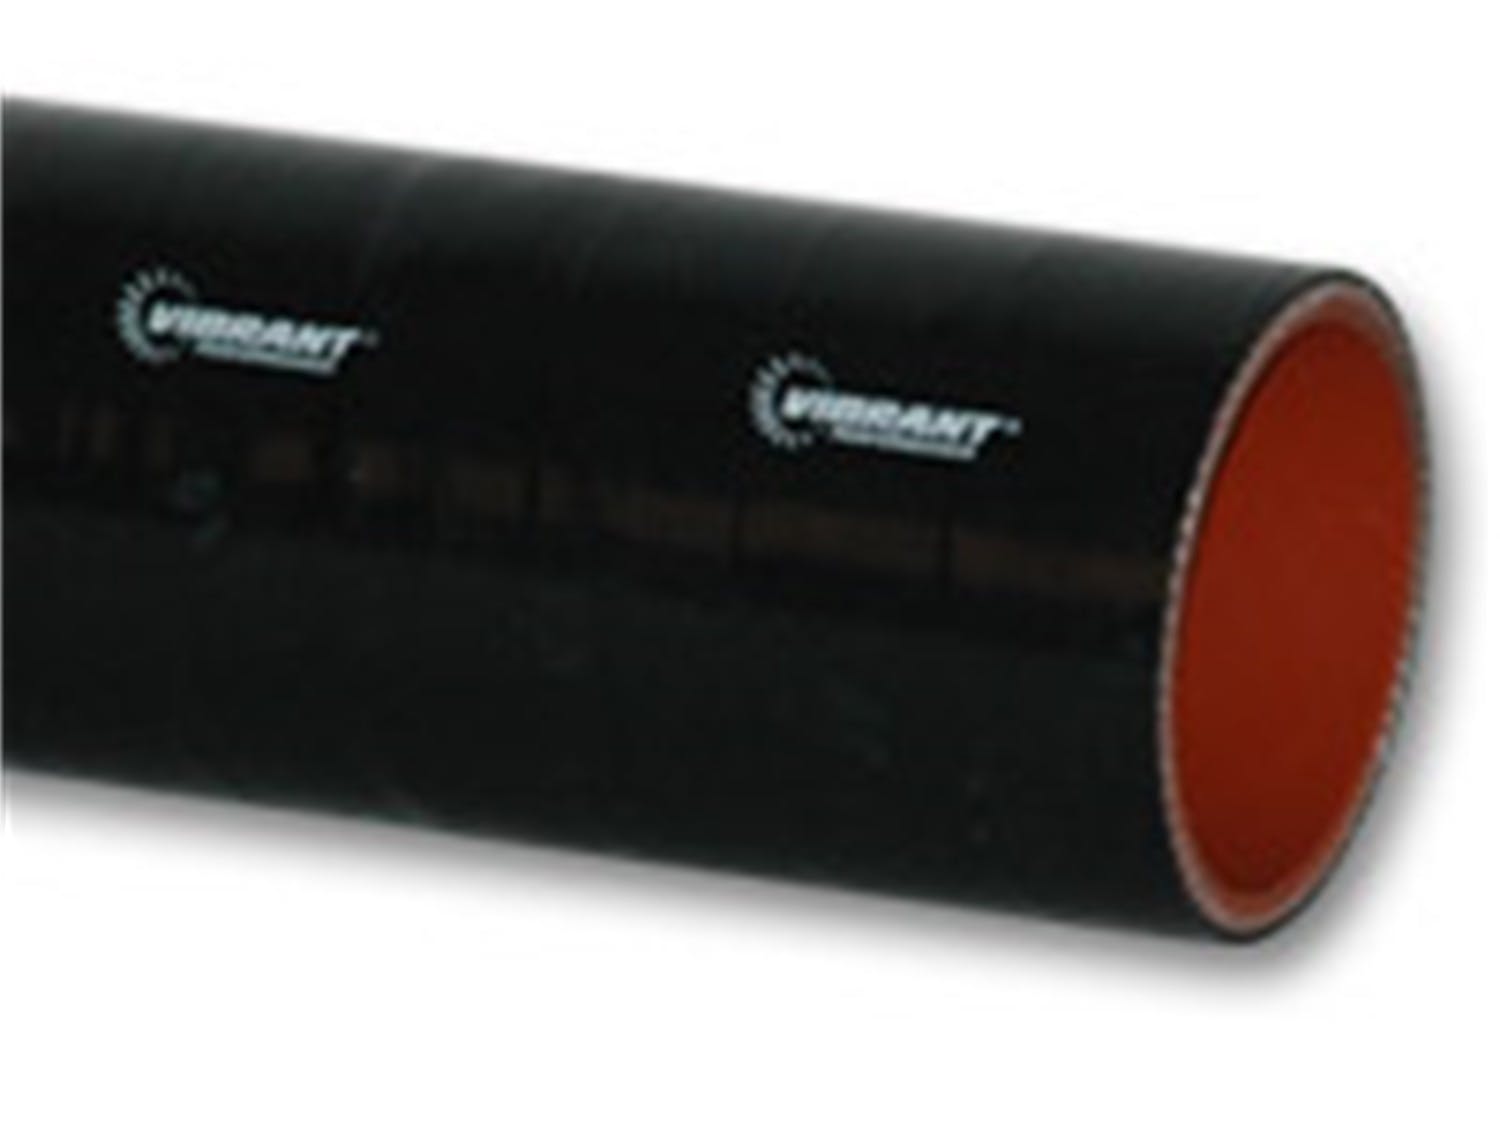 Vibrant Performance 2703 4 Ply Silicone Sleeve, 1.5 inch I.D. x 36 inch Long - Black